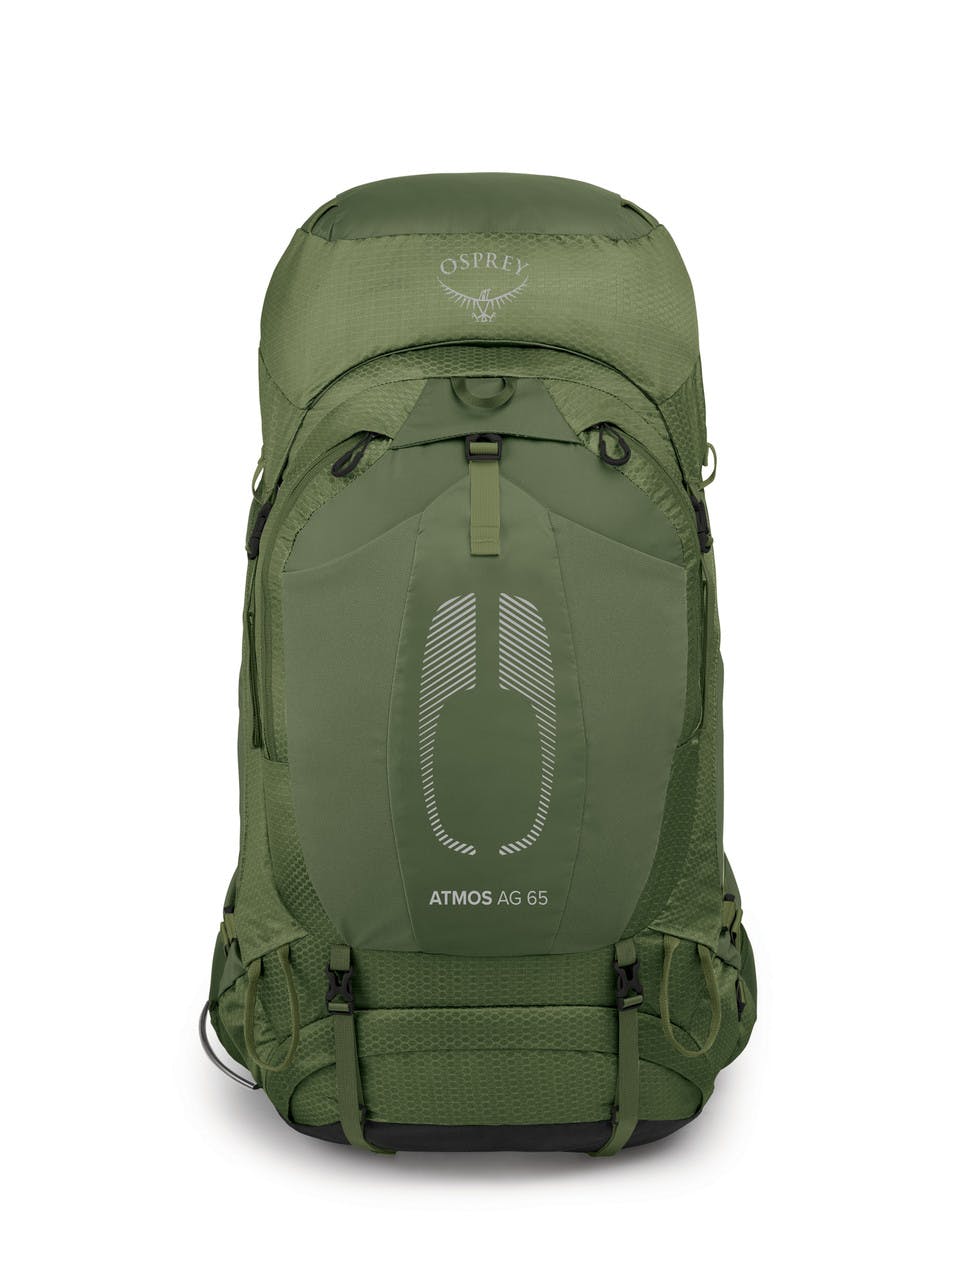 Atmos AG 65 Backpack Mythical Green